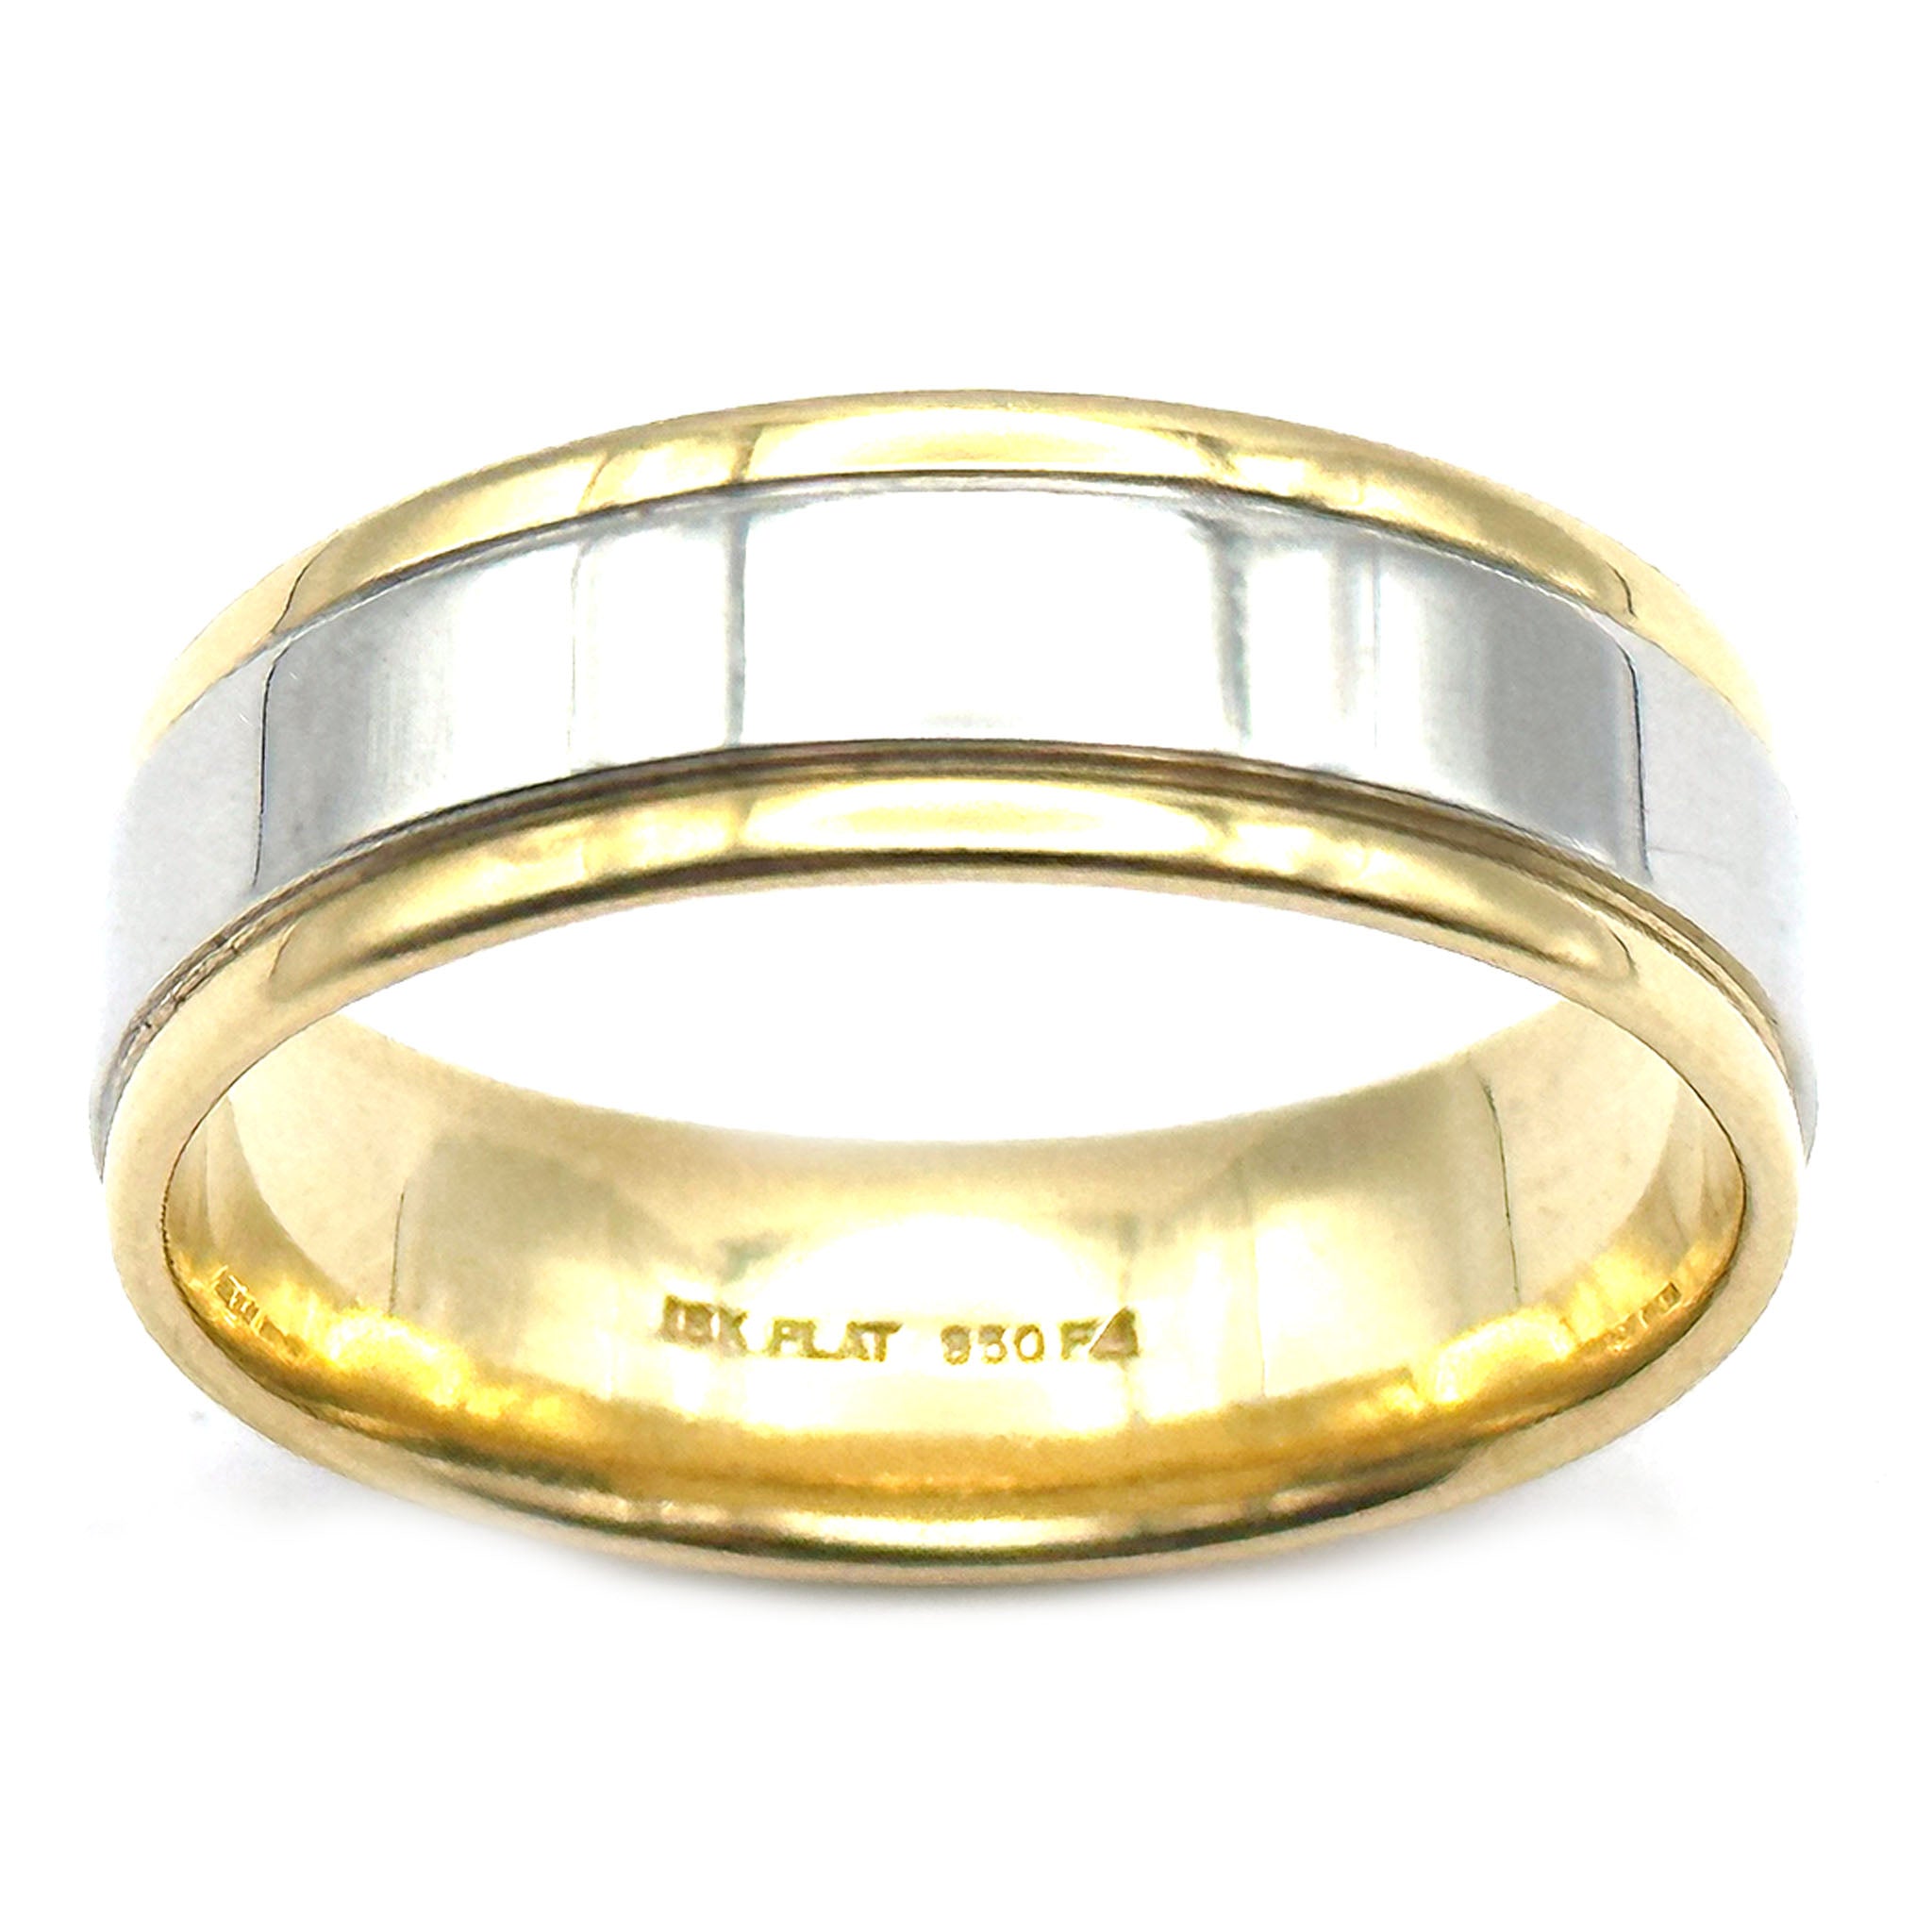 $3990 18Kt Yellow Gold and Platinum 7mm Men's Wedding Band Ring Size 13.5